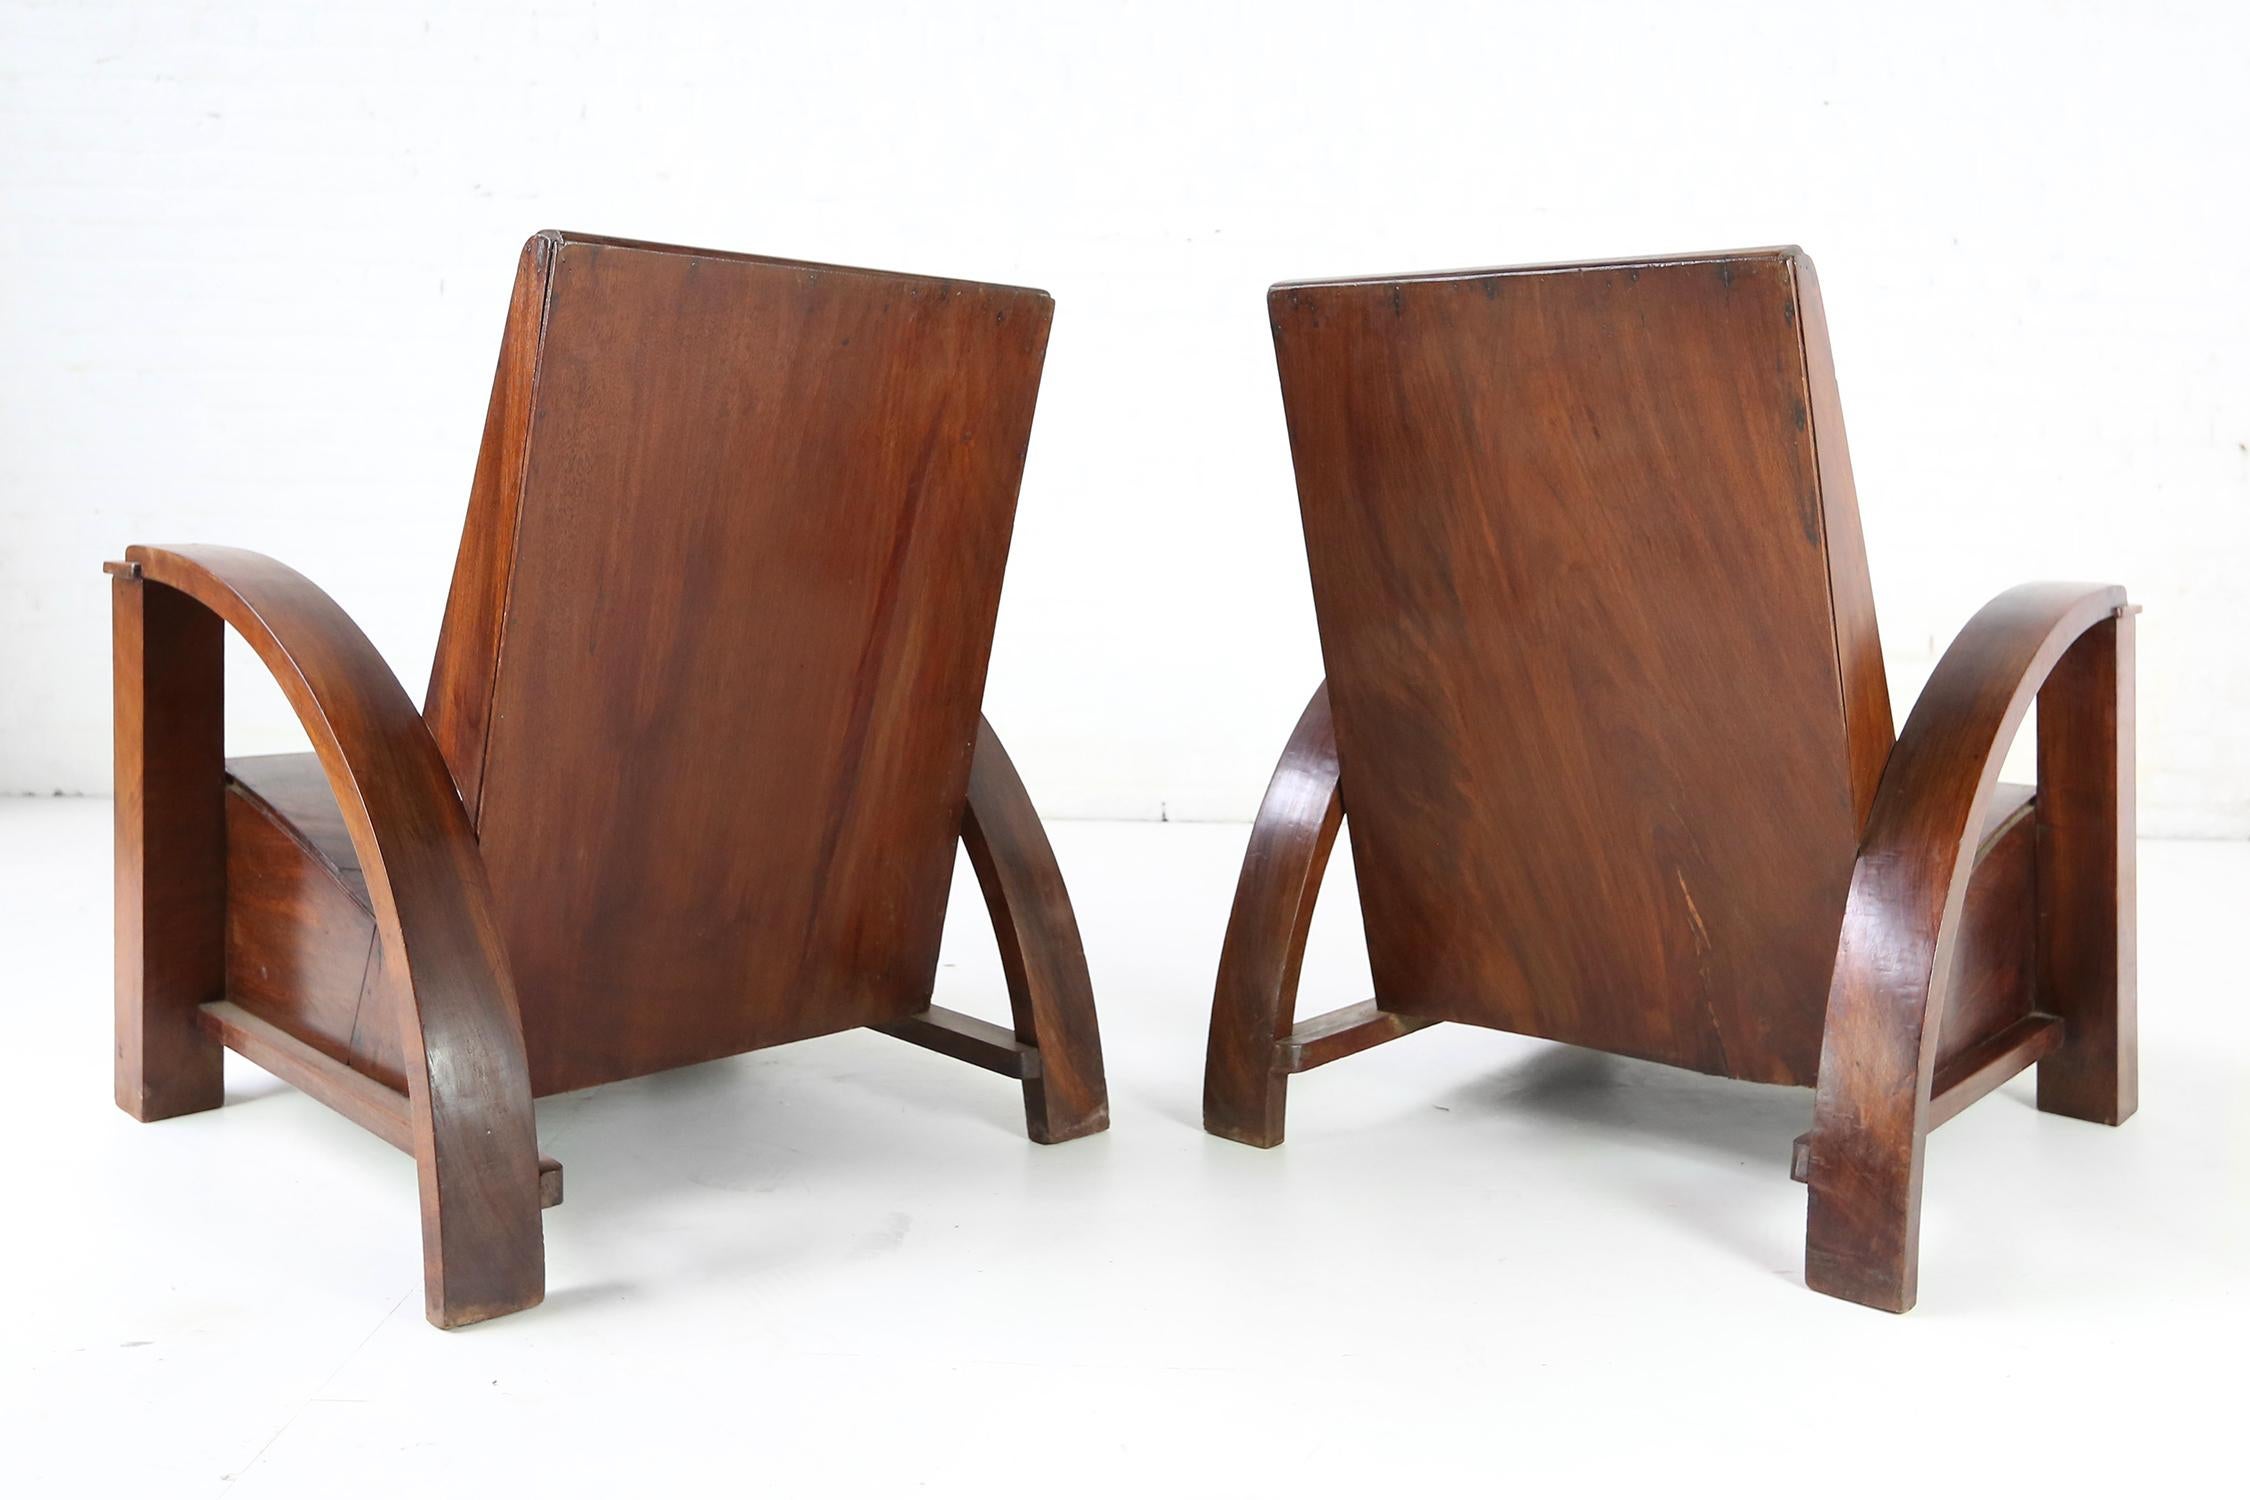 Mid-20th Century French Modernist Colonial Lounge Chairs in Mahogany, circa 1940s